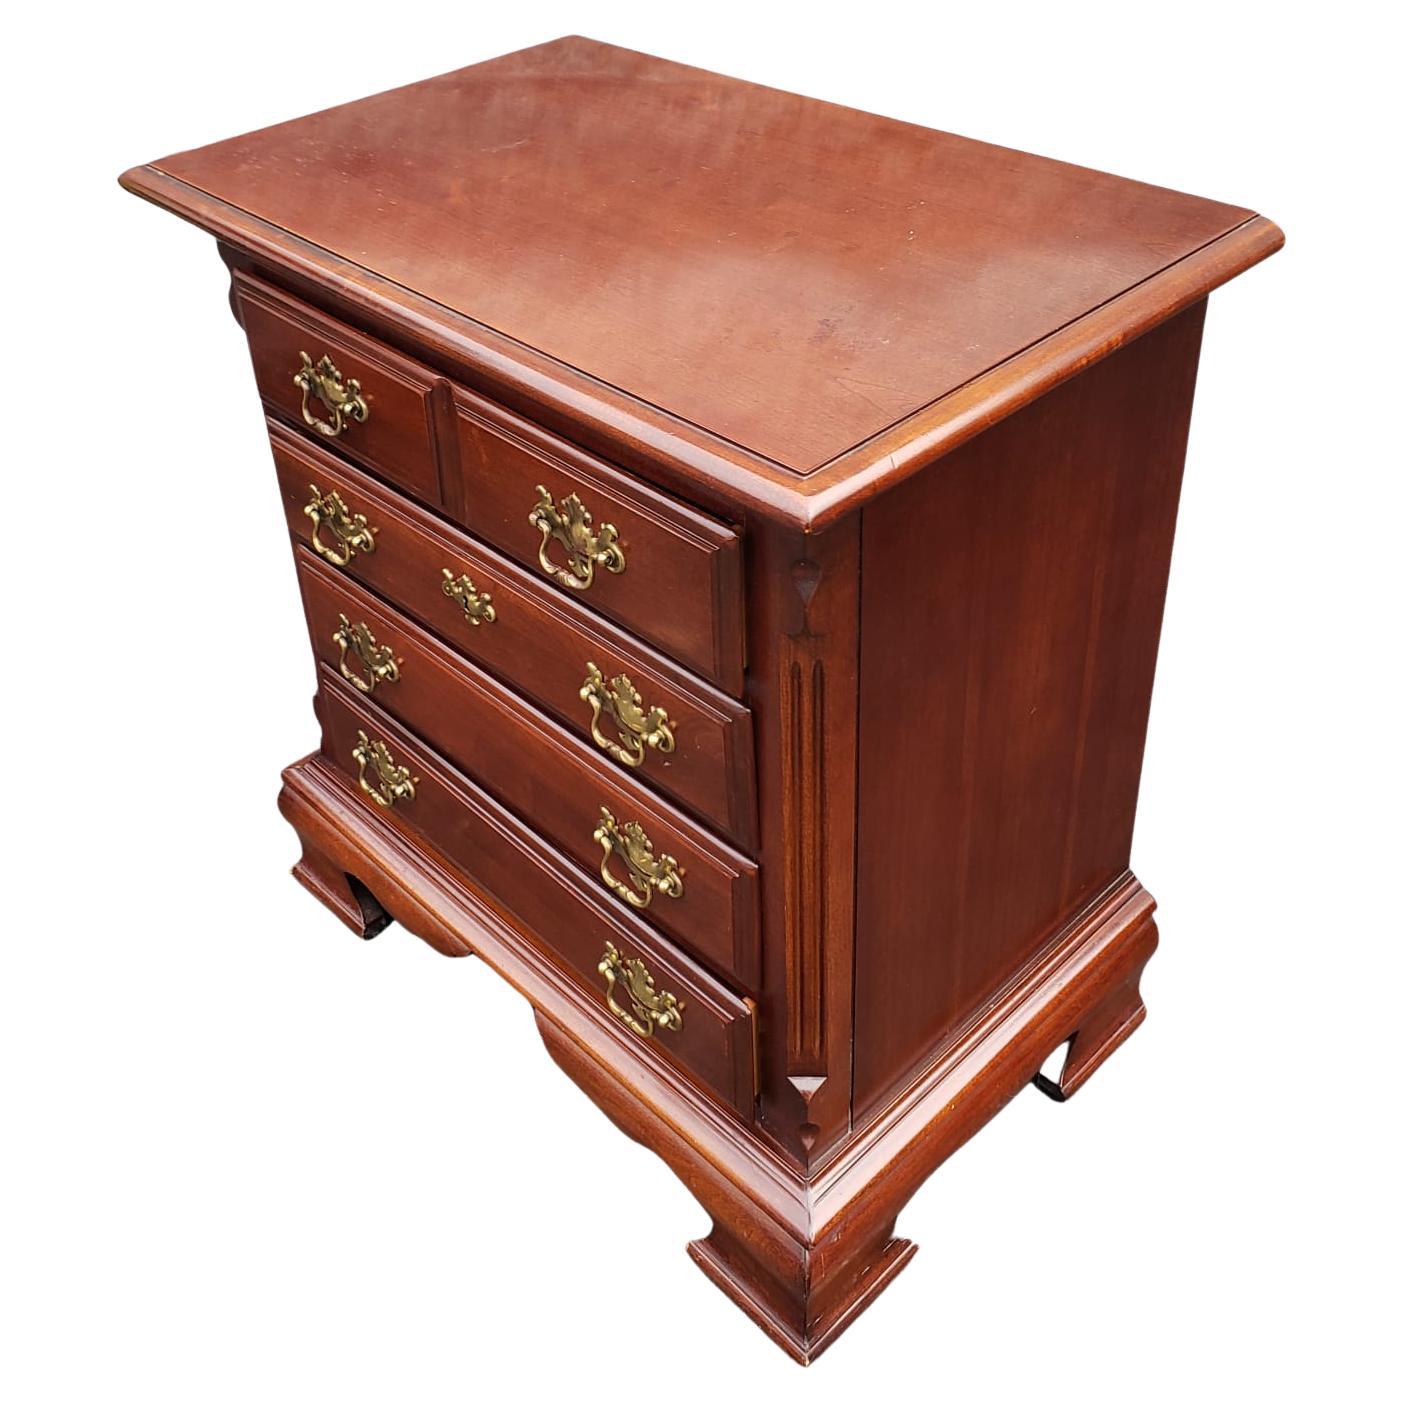 Woodwork Lexington Furniture Chippendale Bedside Chest of Drawers Nightstands, Pair